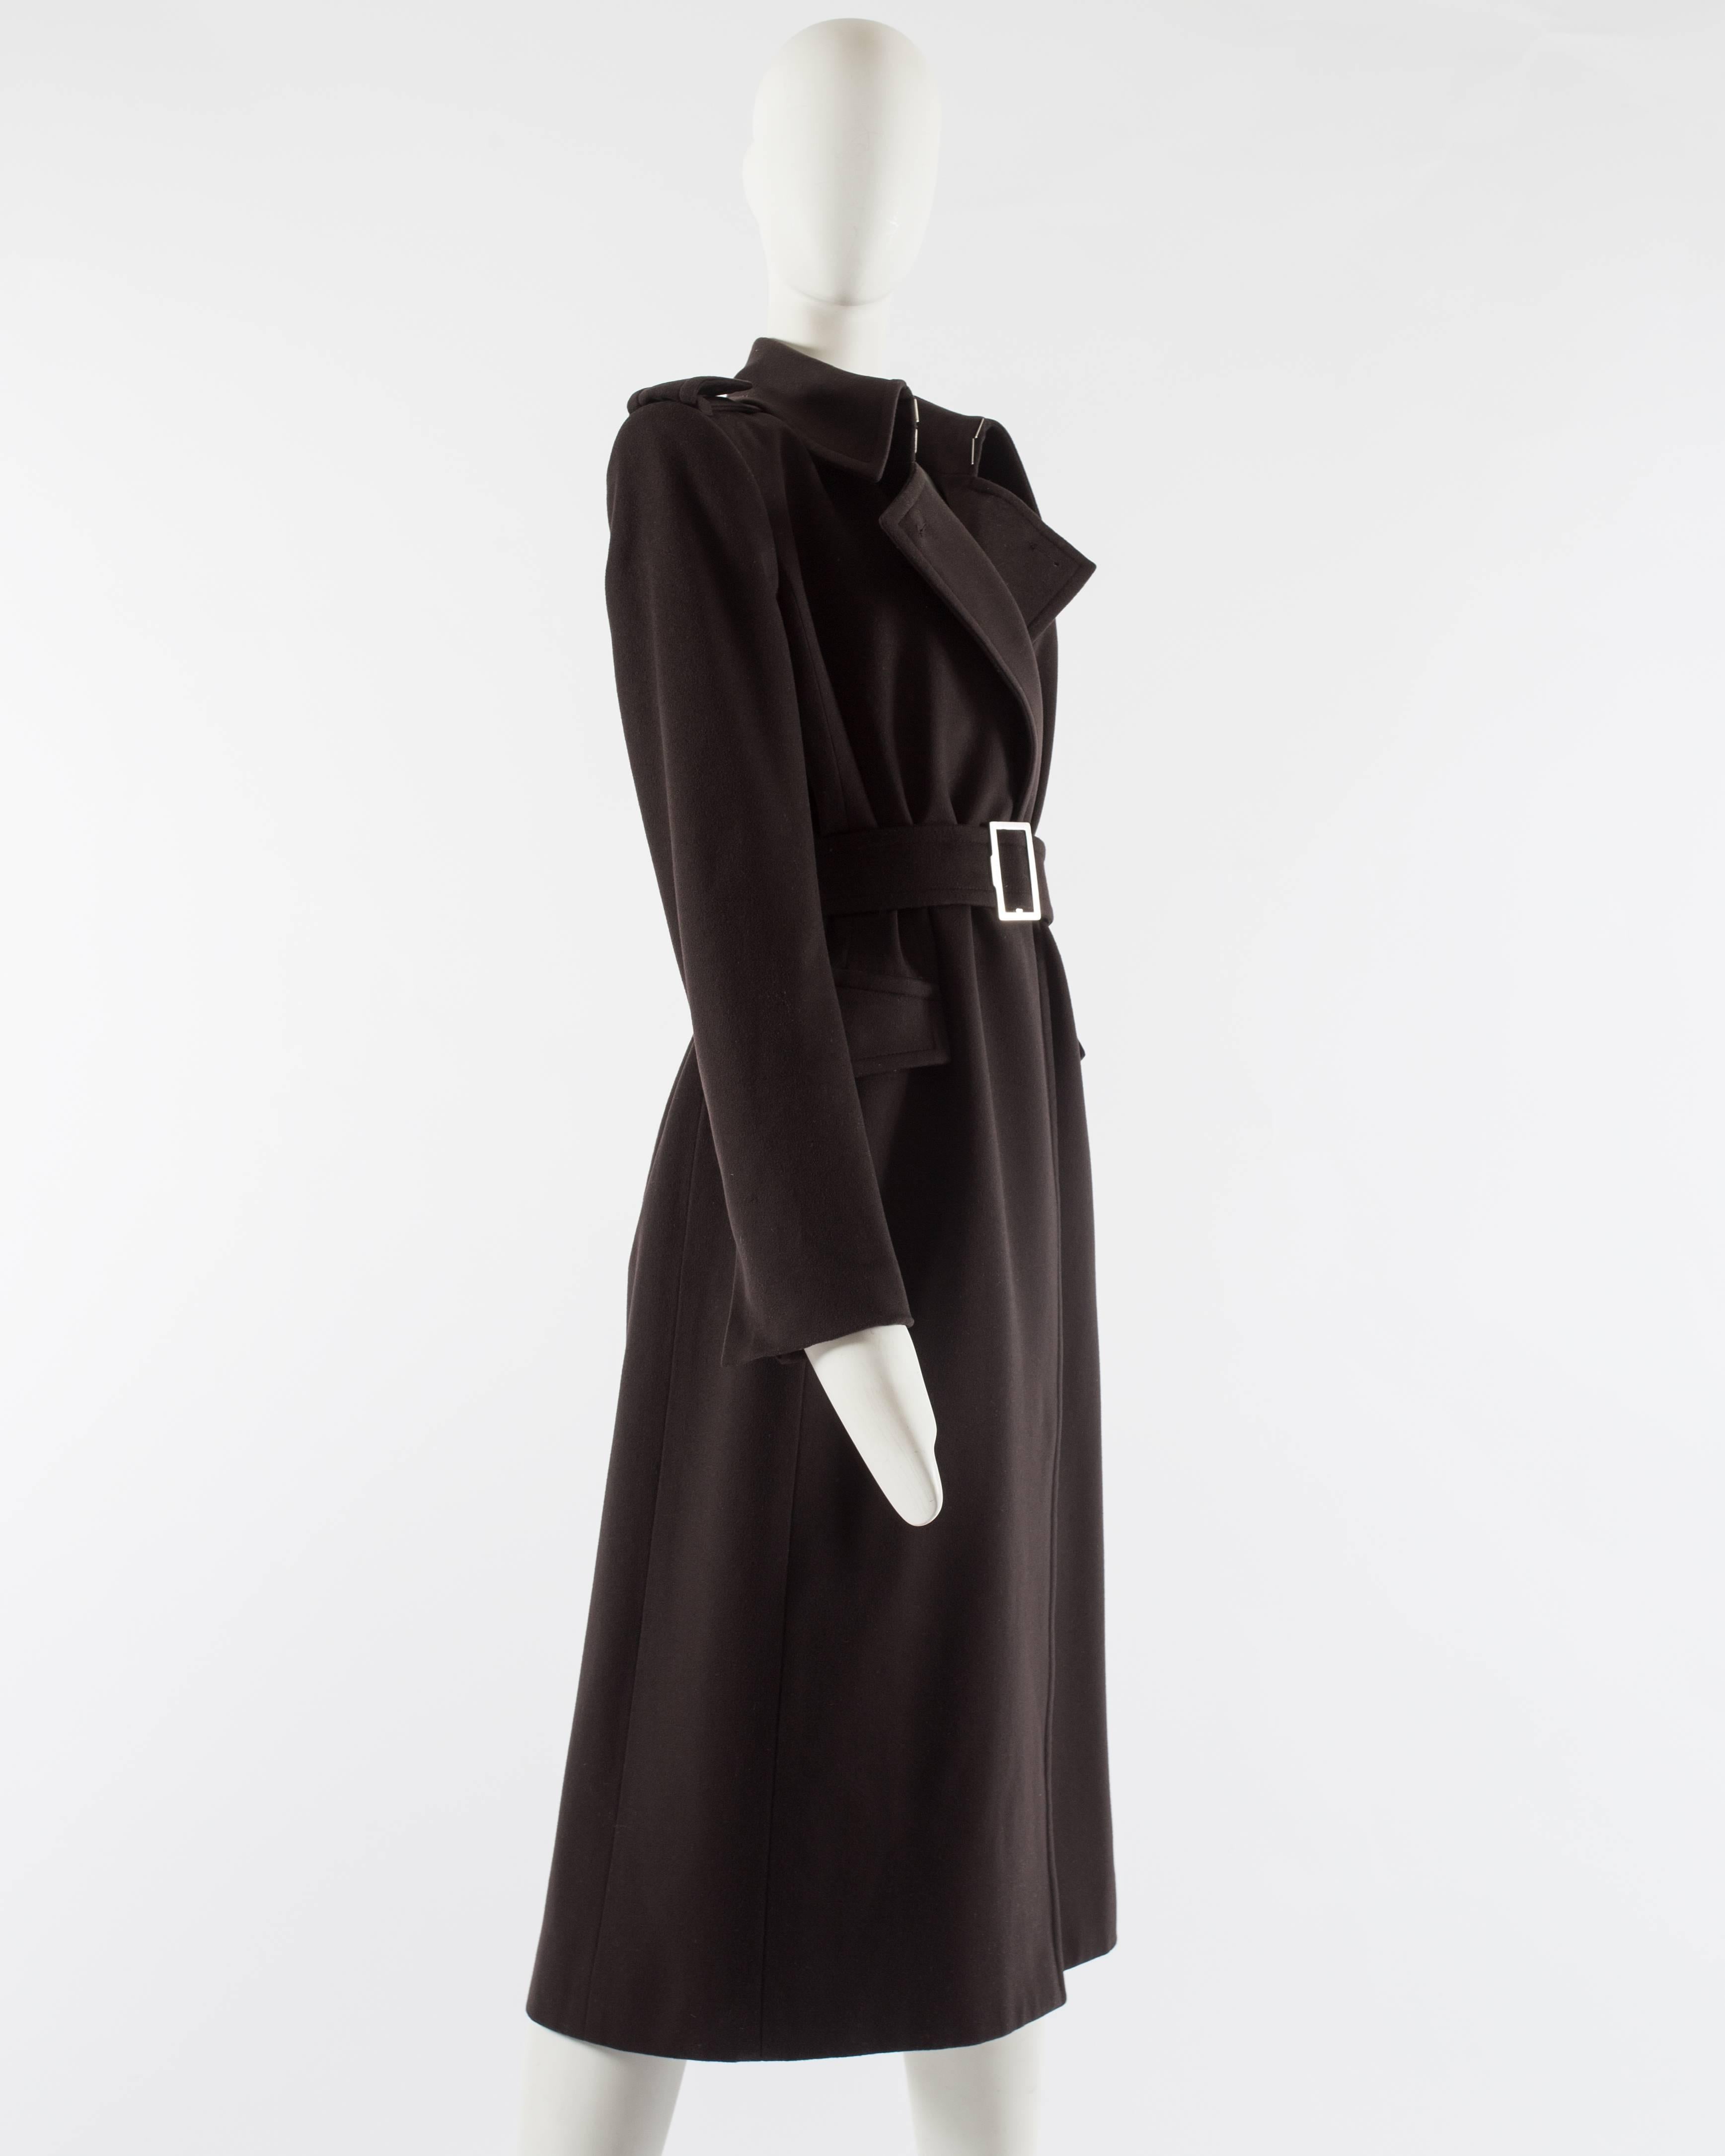 Women's Yves Saint Laurent by Tom Ford autumn-winter 2001 brown wool military coat